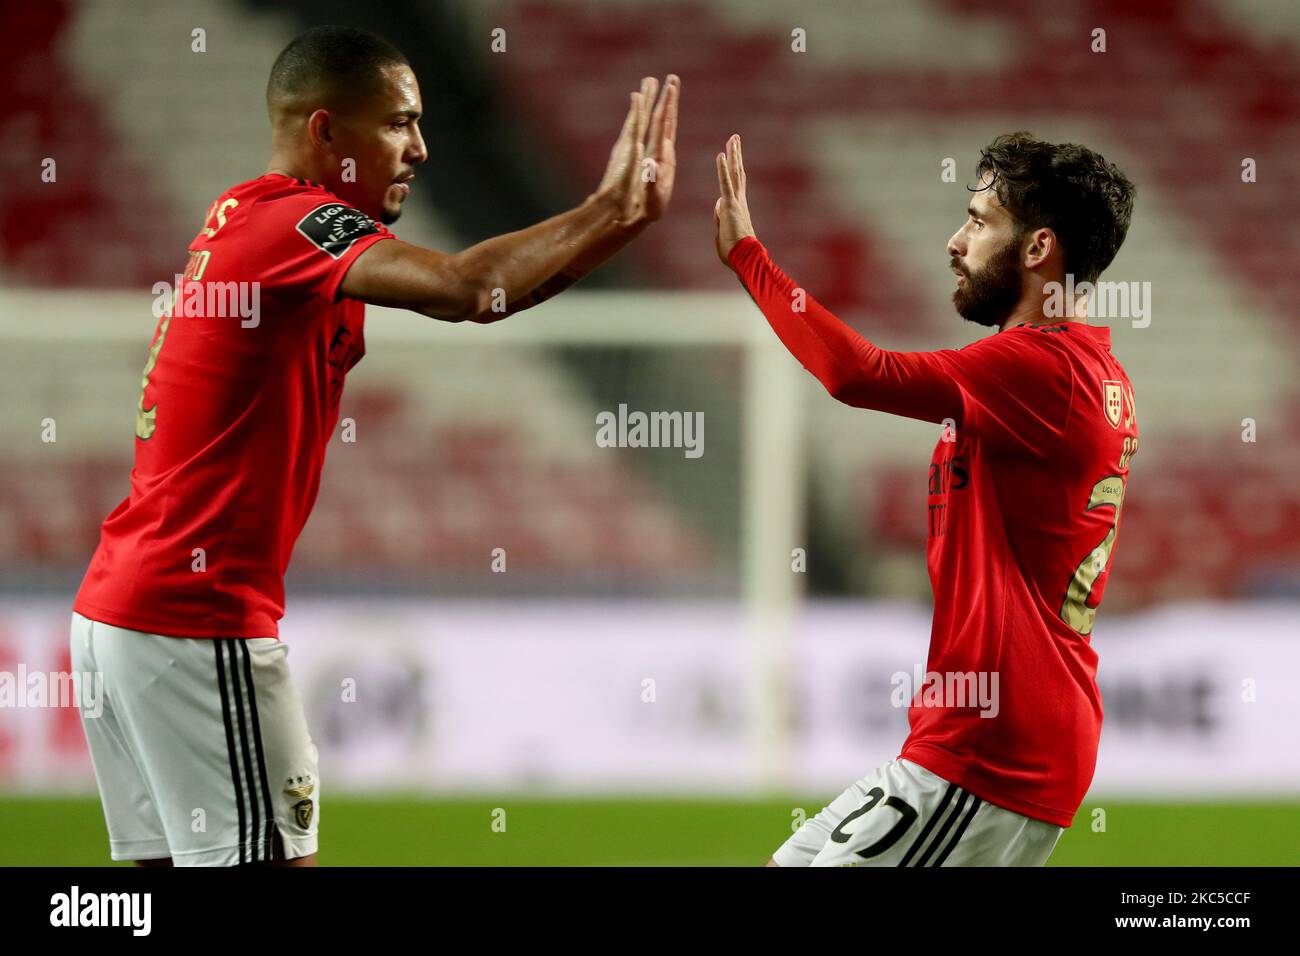 Rafa Silva of SL Benfica (R ) celebrates with Gilberto after scoring during the Portuguese League football match between SL Benfica and FC Pacos Ferreira at the Luz stadium in Lisbon, Portugal on December 6, 2020. (Photo by Pedro FiÃºza/NurPhoto) Stock Photo